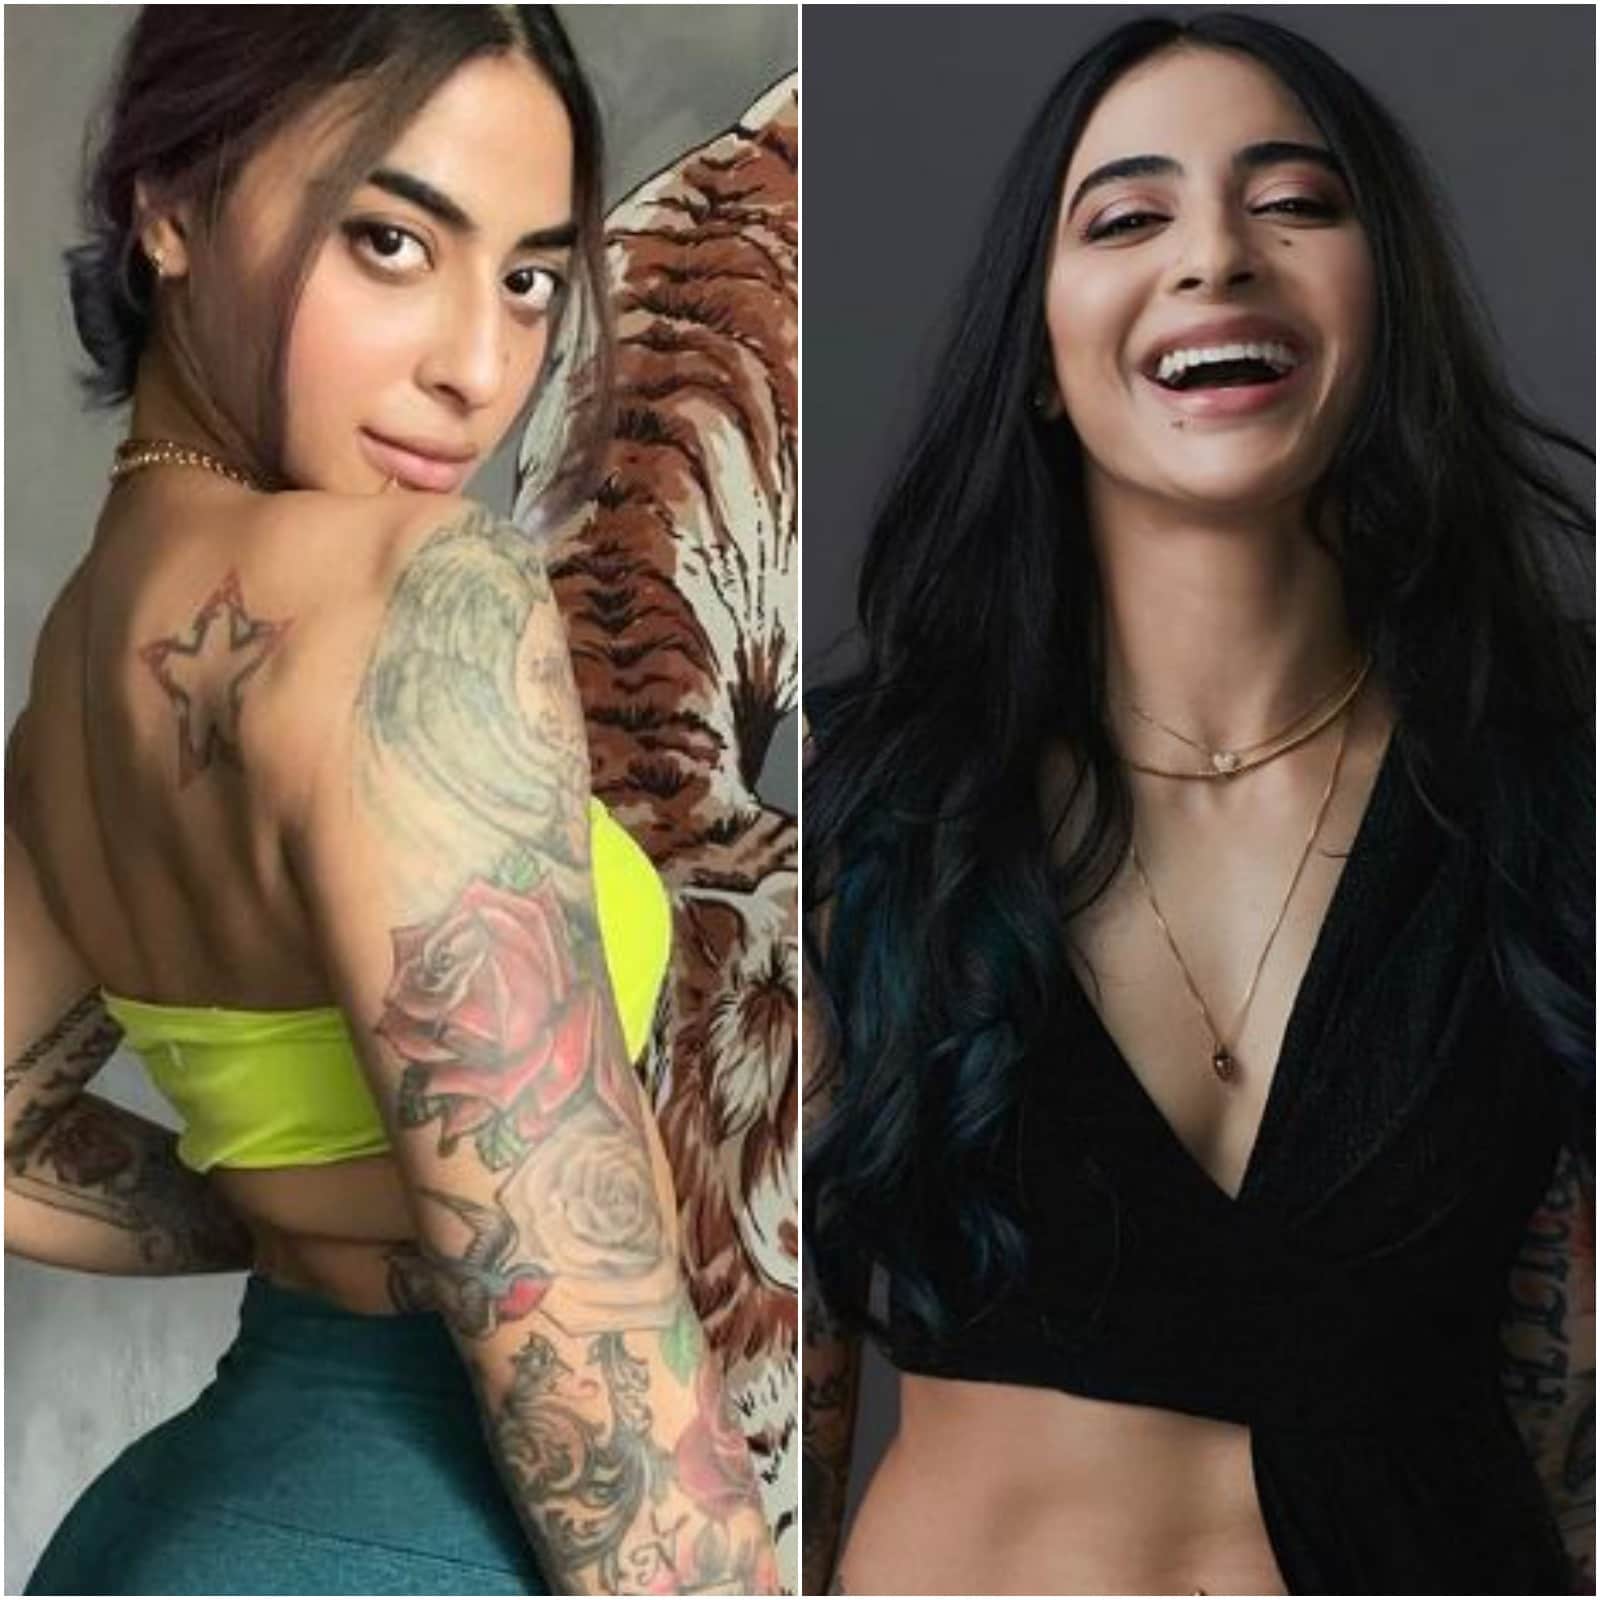 Bani J birthday: The fitness model and actress' stylish athleisure will  make you want to revamp your wardrobe